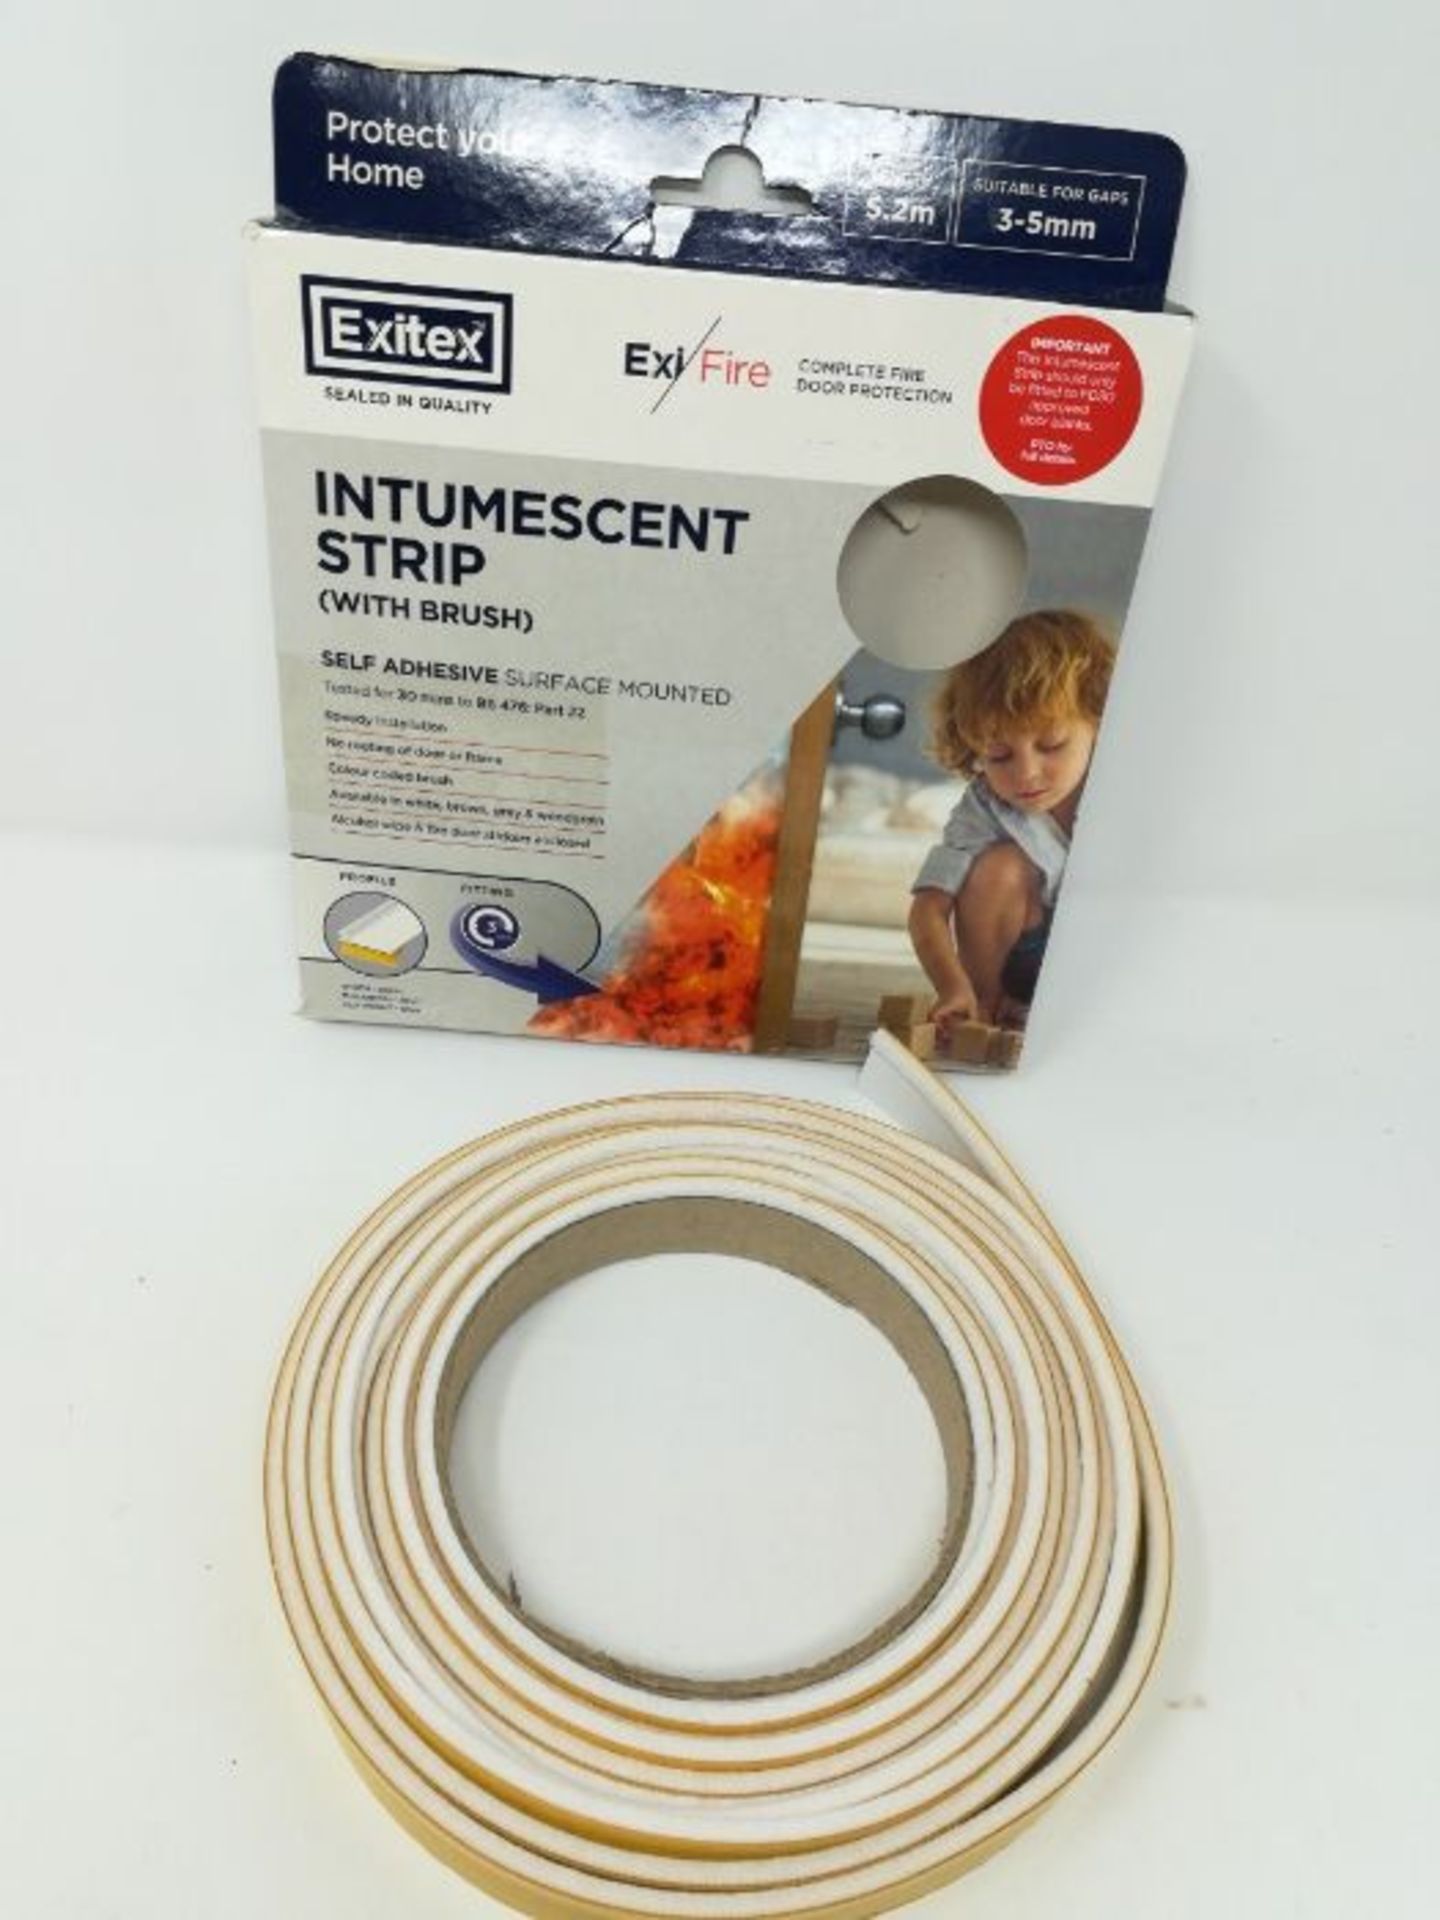 Exitex Self Adhesive Surface Mounted Intumescent Strip with brush, White, 5.2m - Image 3 of 3